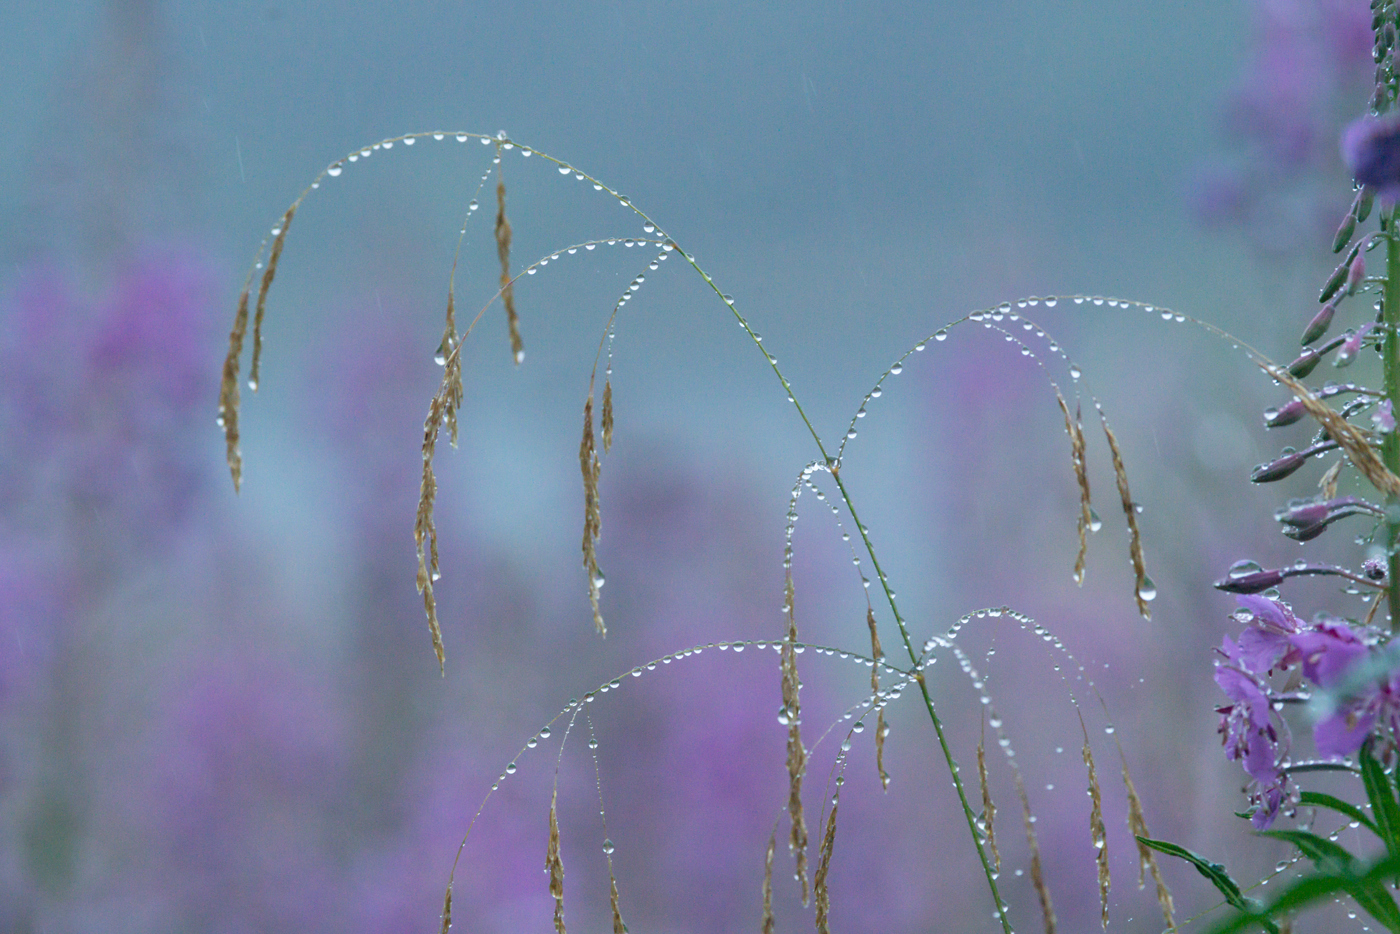 Delicate grasses bejewelled with raindrops. Amidst a soft-focus backdrop of gentle purple wildflowers, the slender grass blades arc gracefully, each tiny droplet glistening like a string of pearls in the muted light. The overall impression is one of tranquil beauty, as if nature has adorned itself with a sprinkling of liquid diamonds. a kite flying in the sky